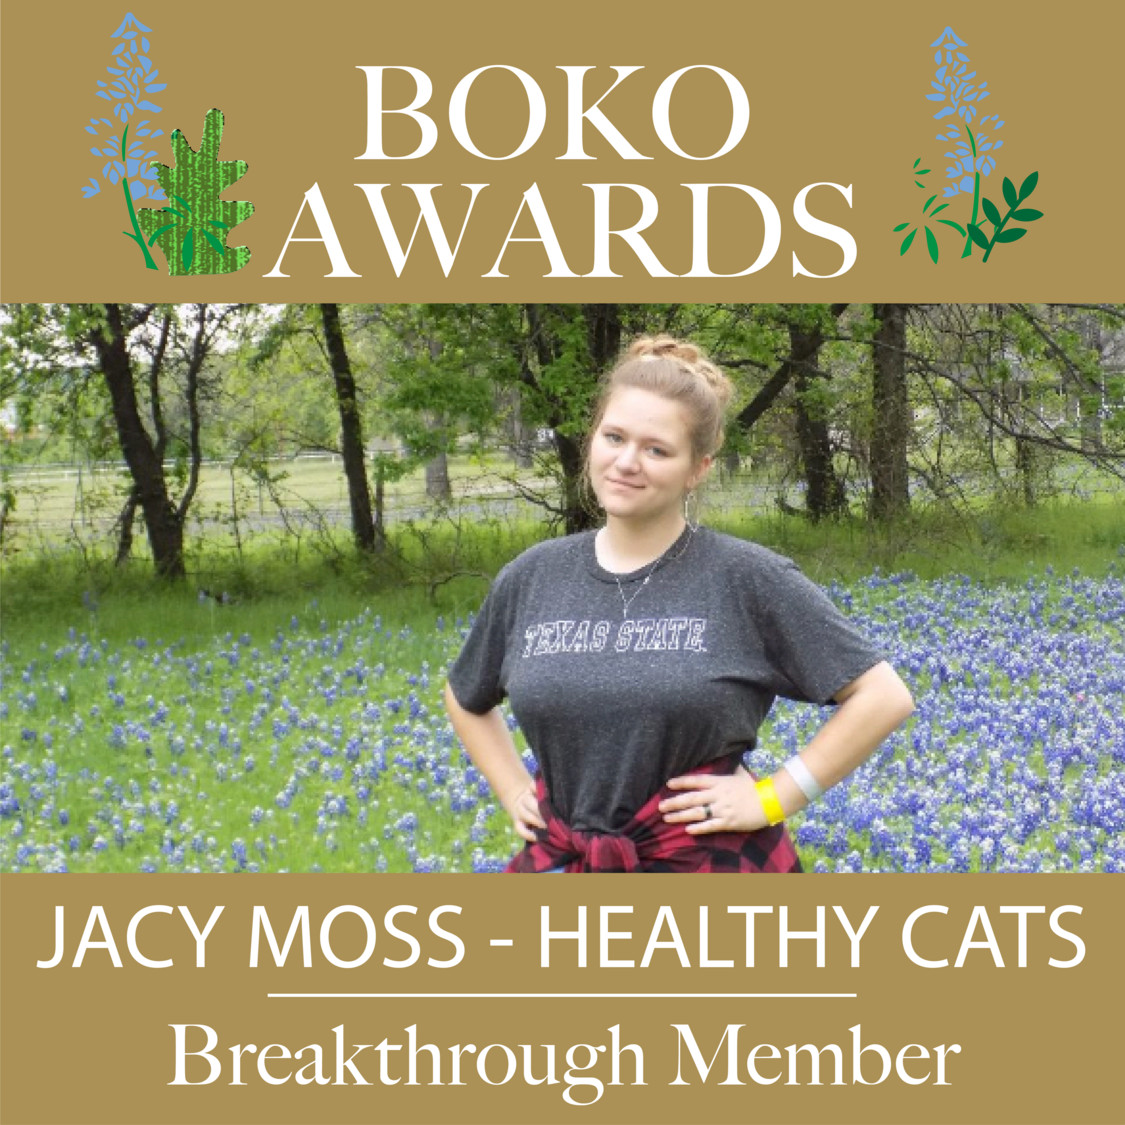 Picture of text displaying that Jacy Moss won the Breakthrough Member award.